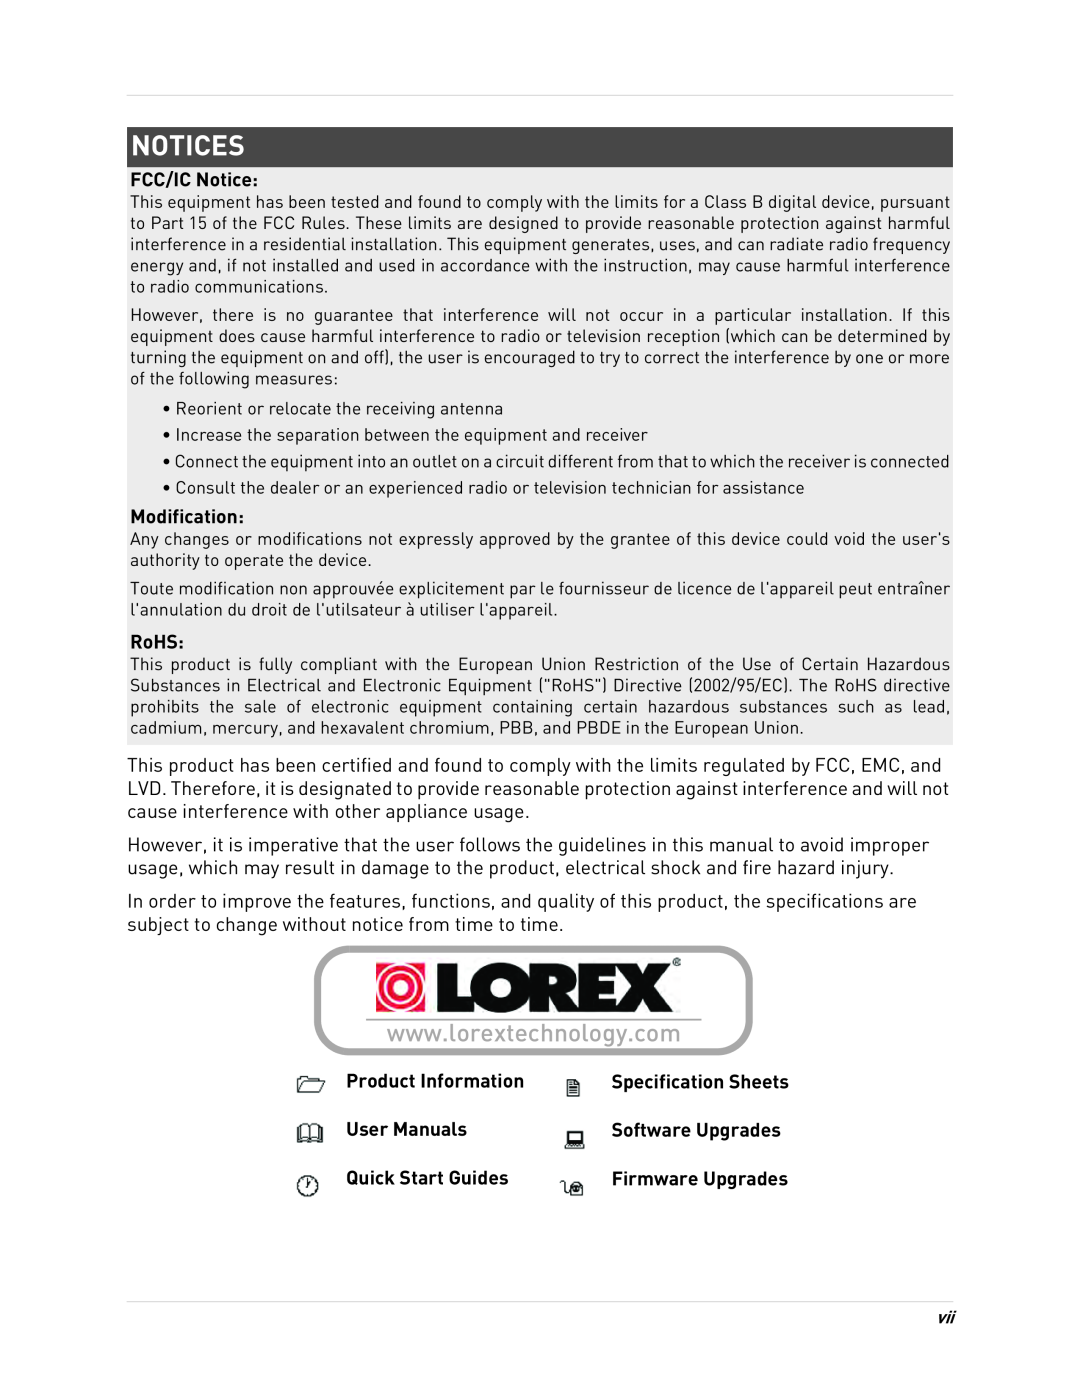 LOREX Technology LH340 EDGE3, LH3481001C8B Notices, FCC/IC Notice, Modification, RoHS, Product Information, User Manuals 